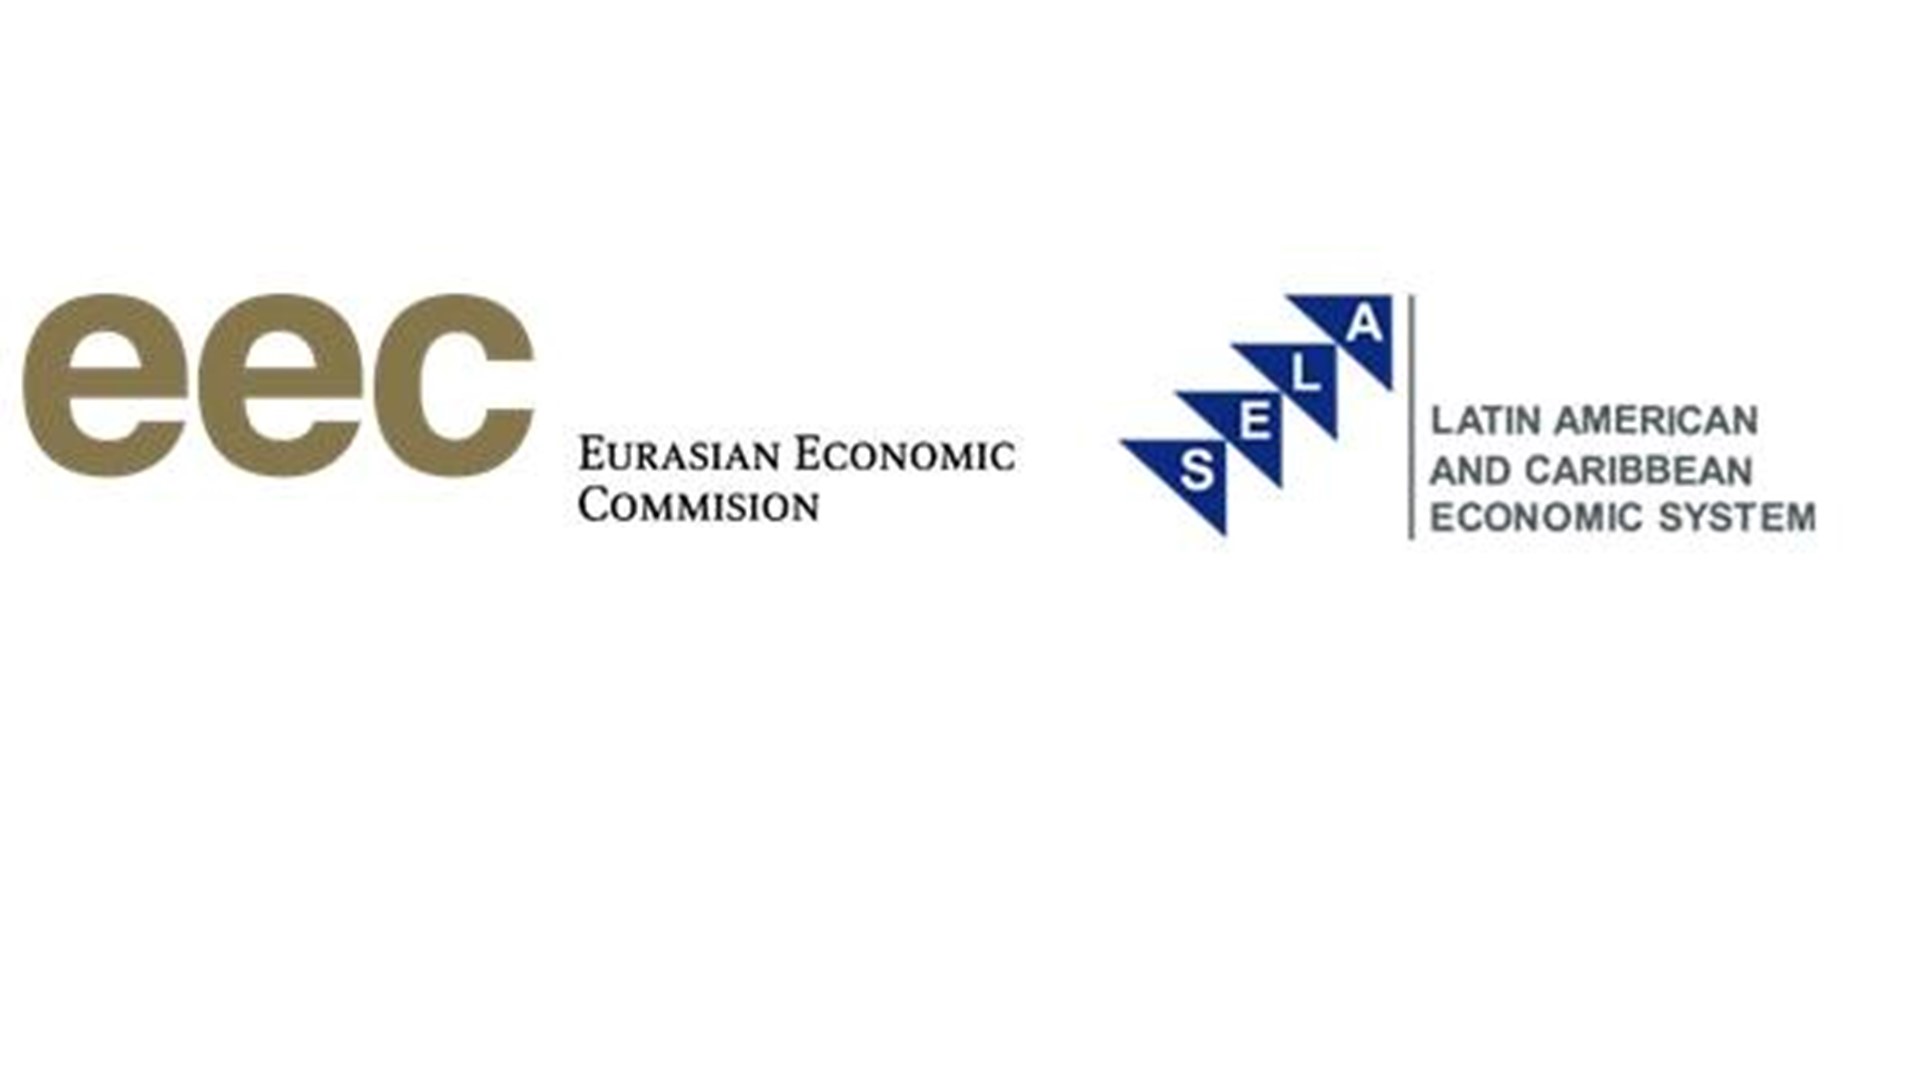 Joint Statement of the Eurasian Economic Commission And the Permanent Secretariat of the Latin American and Caribbean Economic System on the outcome of the EAEU-LAC Forum: Eliminating Barriers and Bridge-Building for Business Cooperation